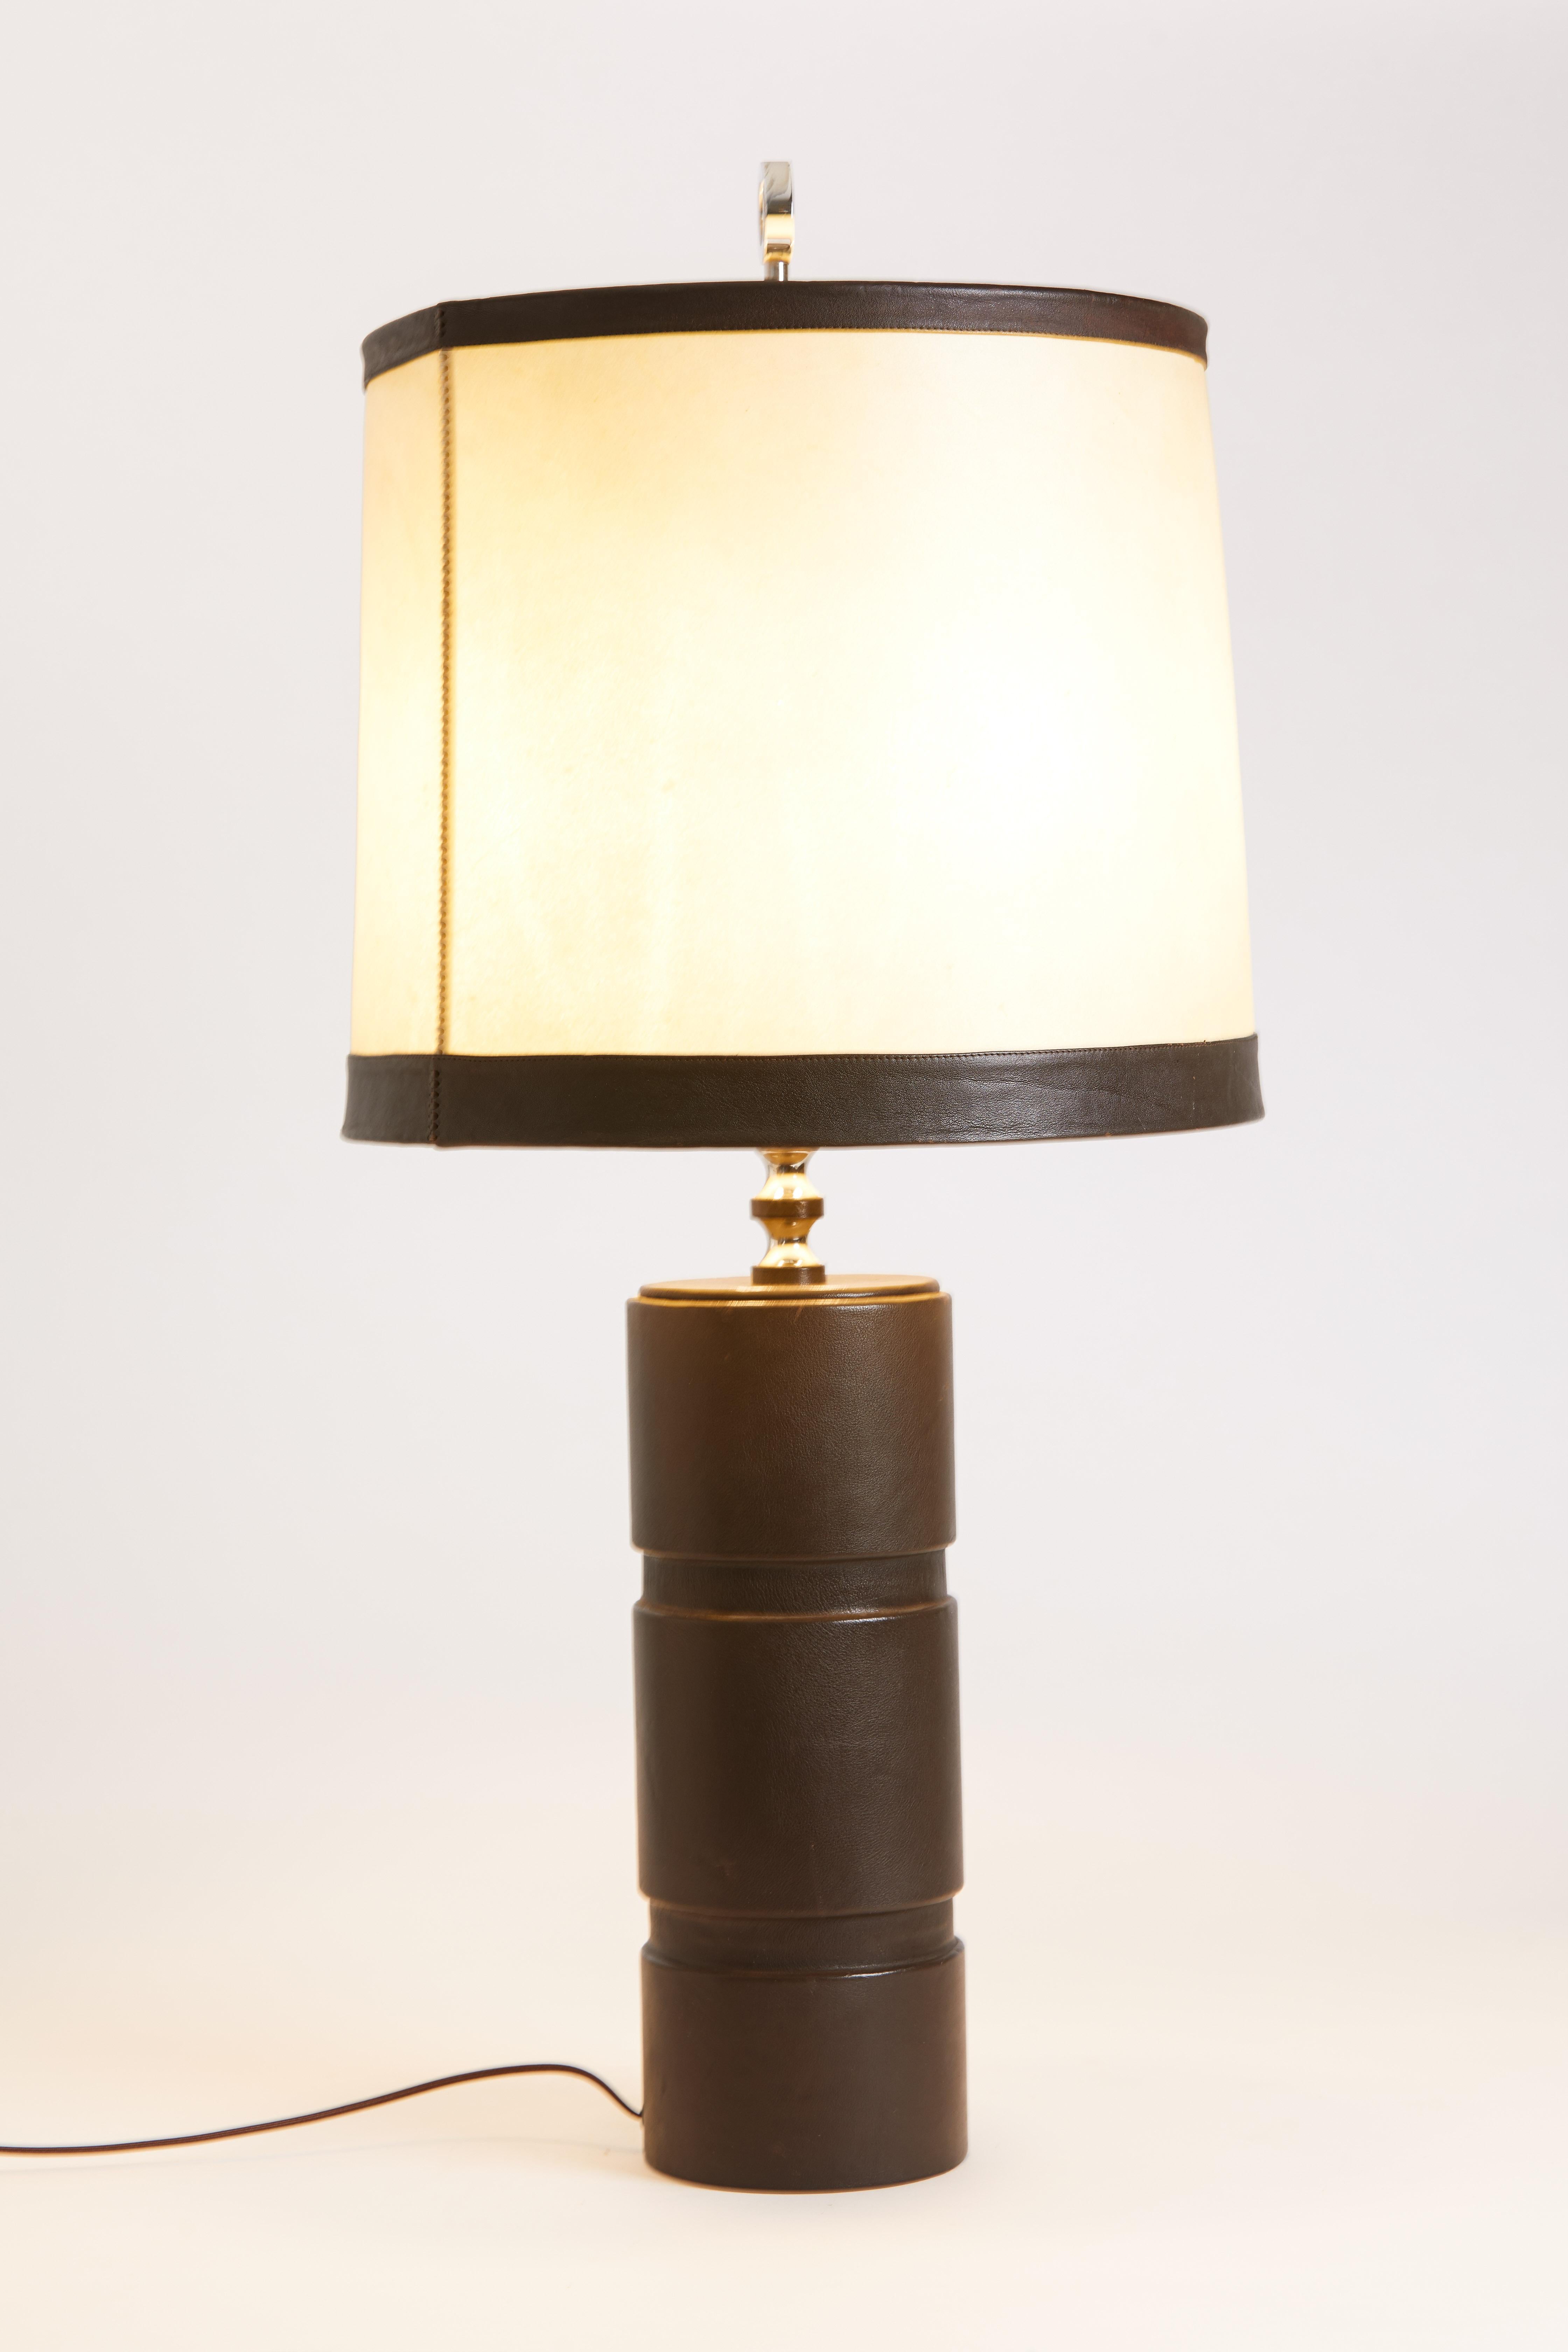 1970s French leather table lamp with chocolate brown trim and parchment shade.